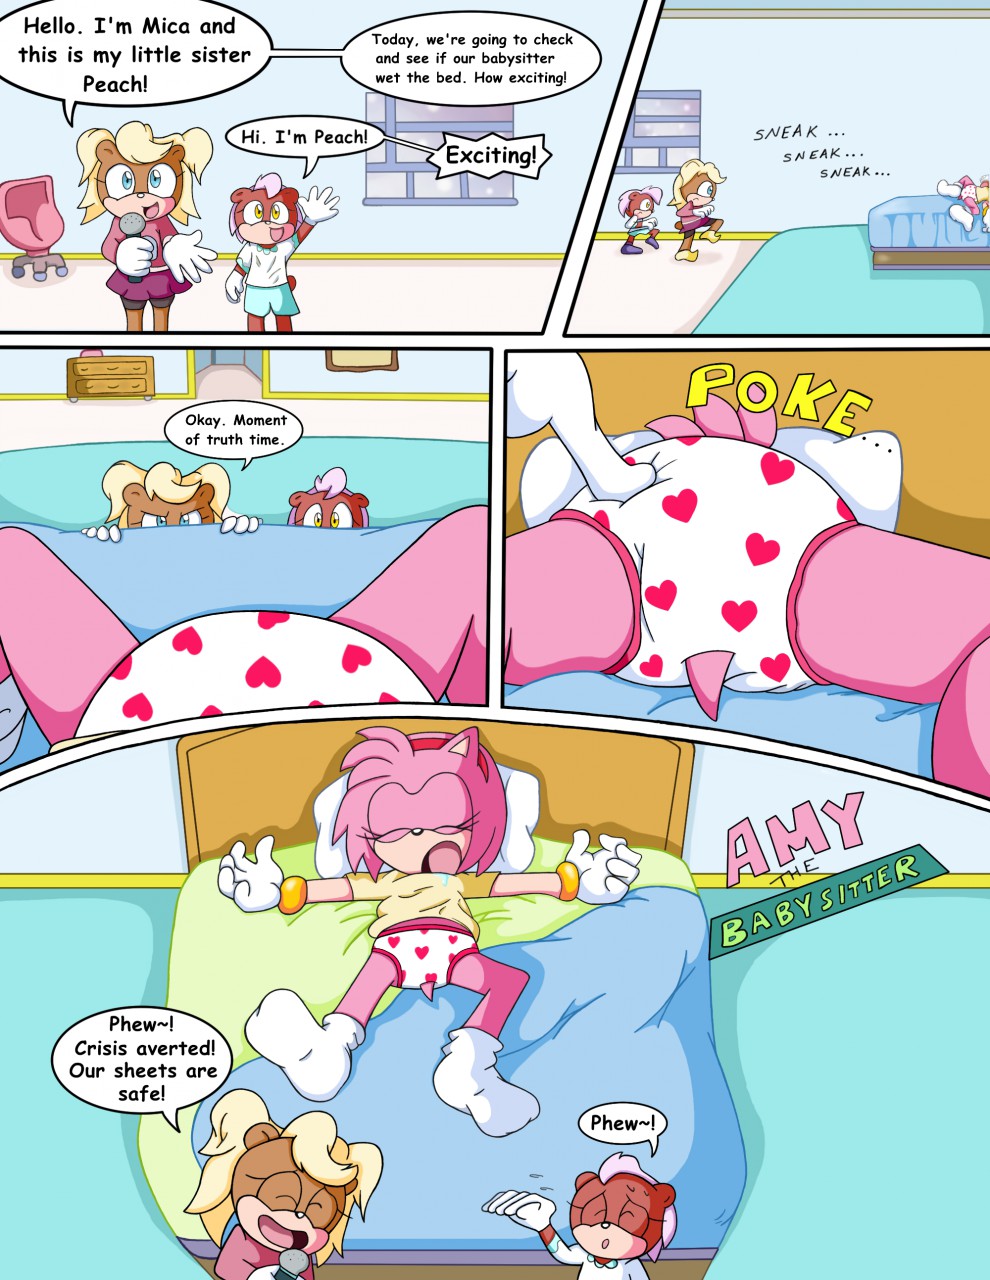 Amy the Babysitter! - Page 1 of 12 by SDCharm -- Fur 